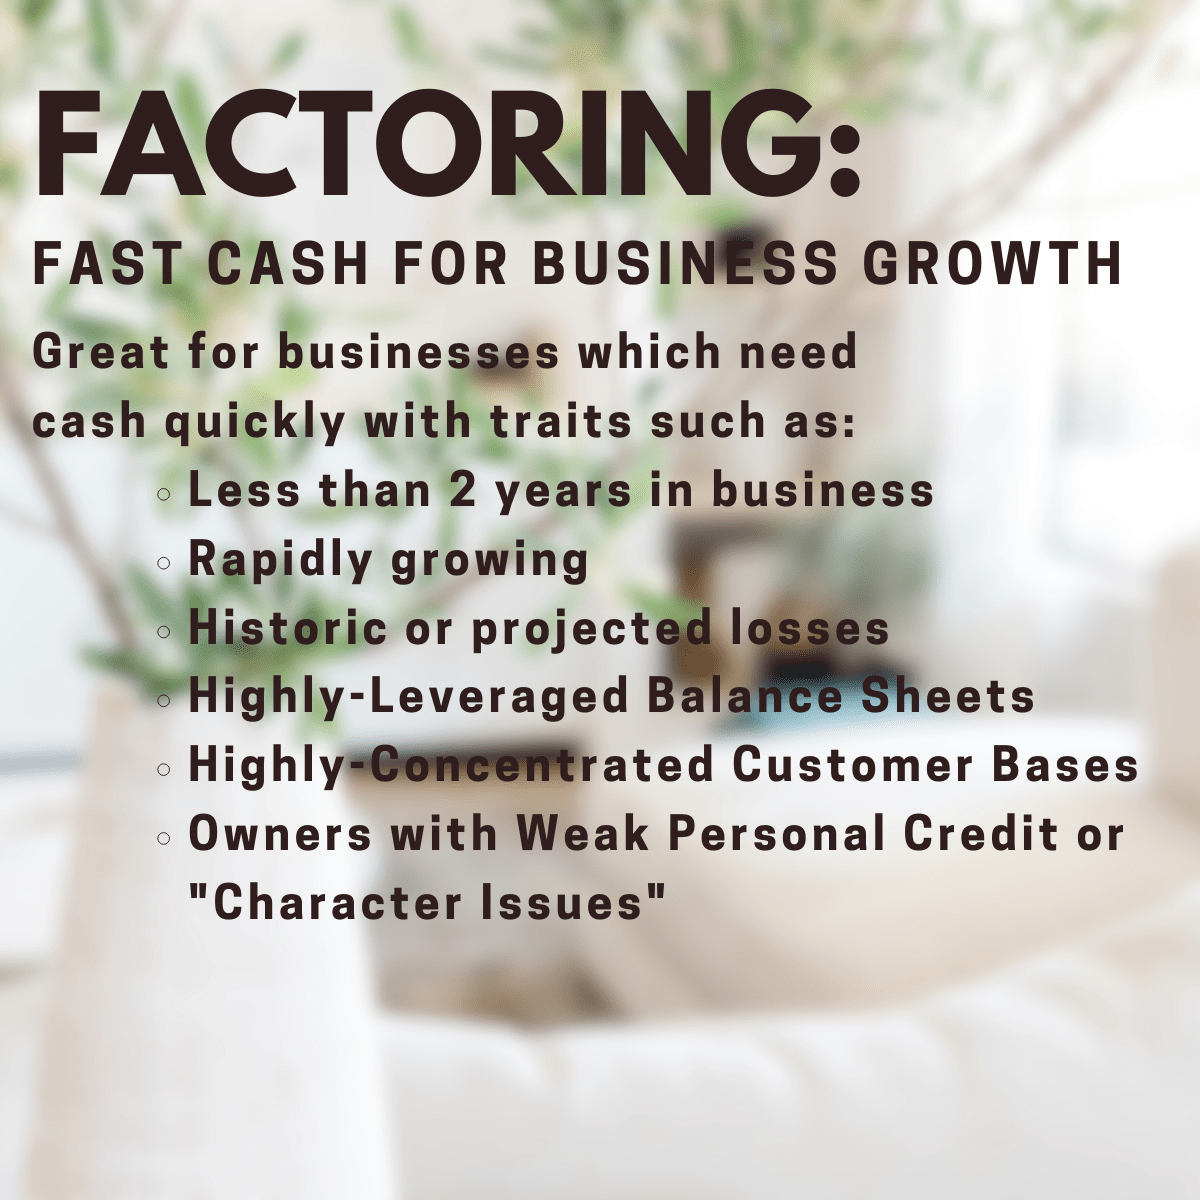 Factoring: Fast Cash for Business Growth